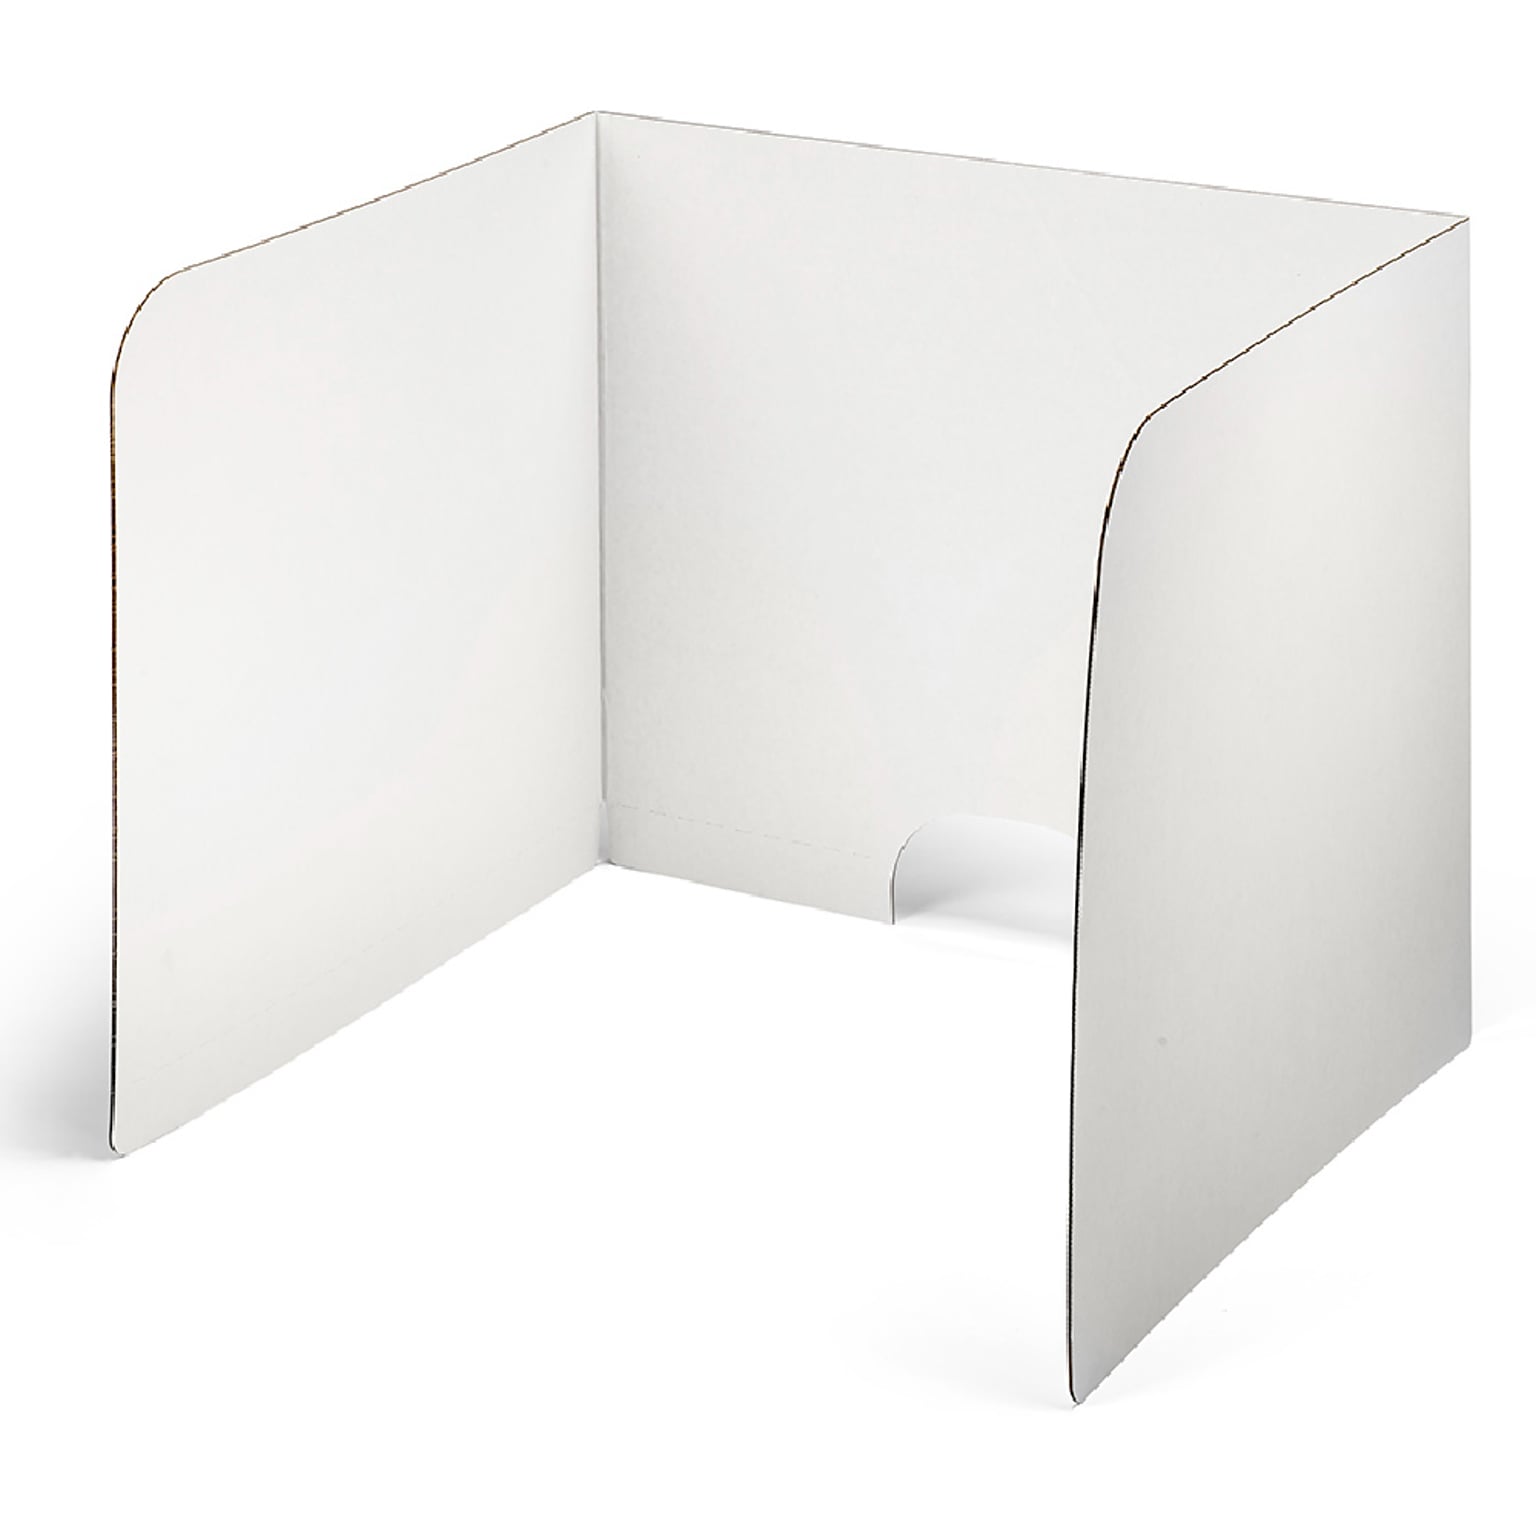 Classroom Products Foldable Cardboard Freestanding Privacy Shield, 24H x 28W, White, 10/Box (2410 WH)